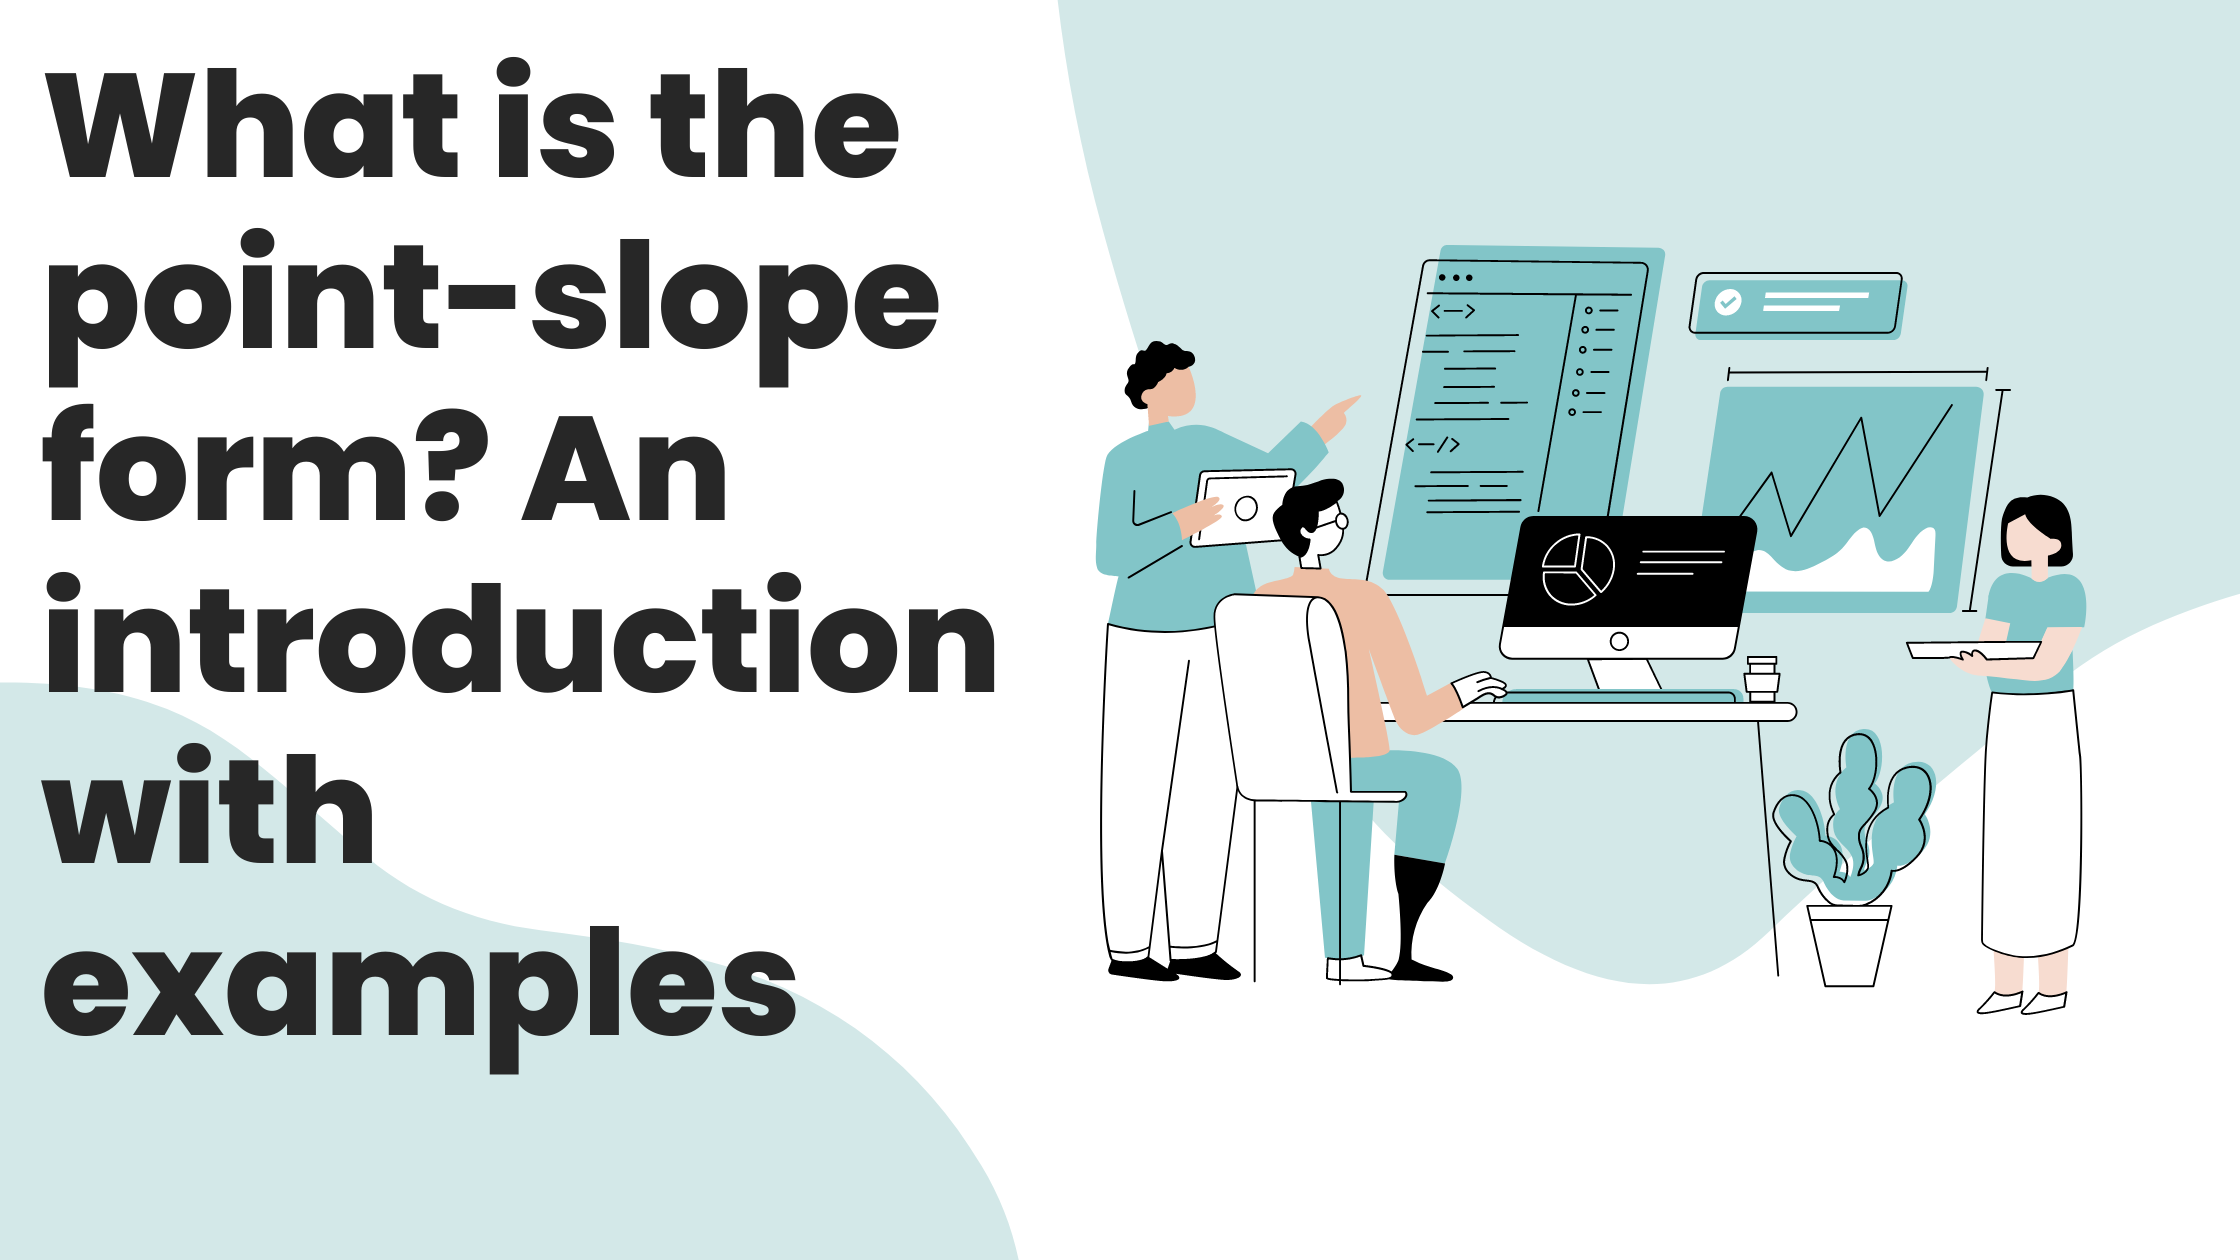 What is the point-slope form? An introduction with examples